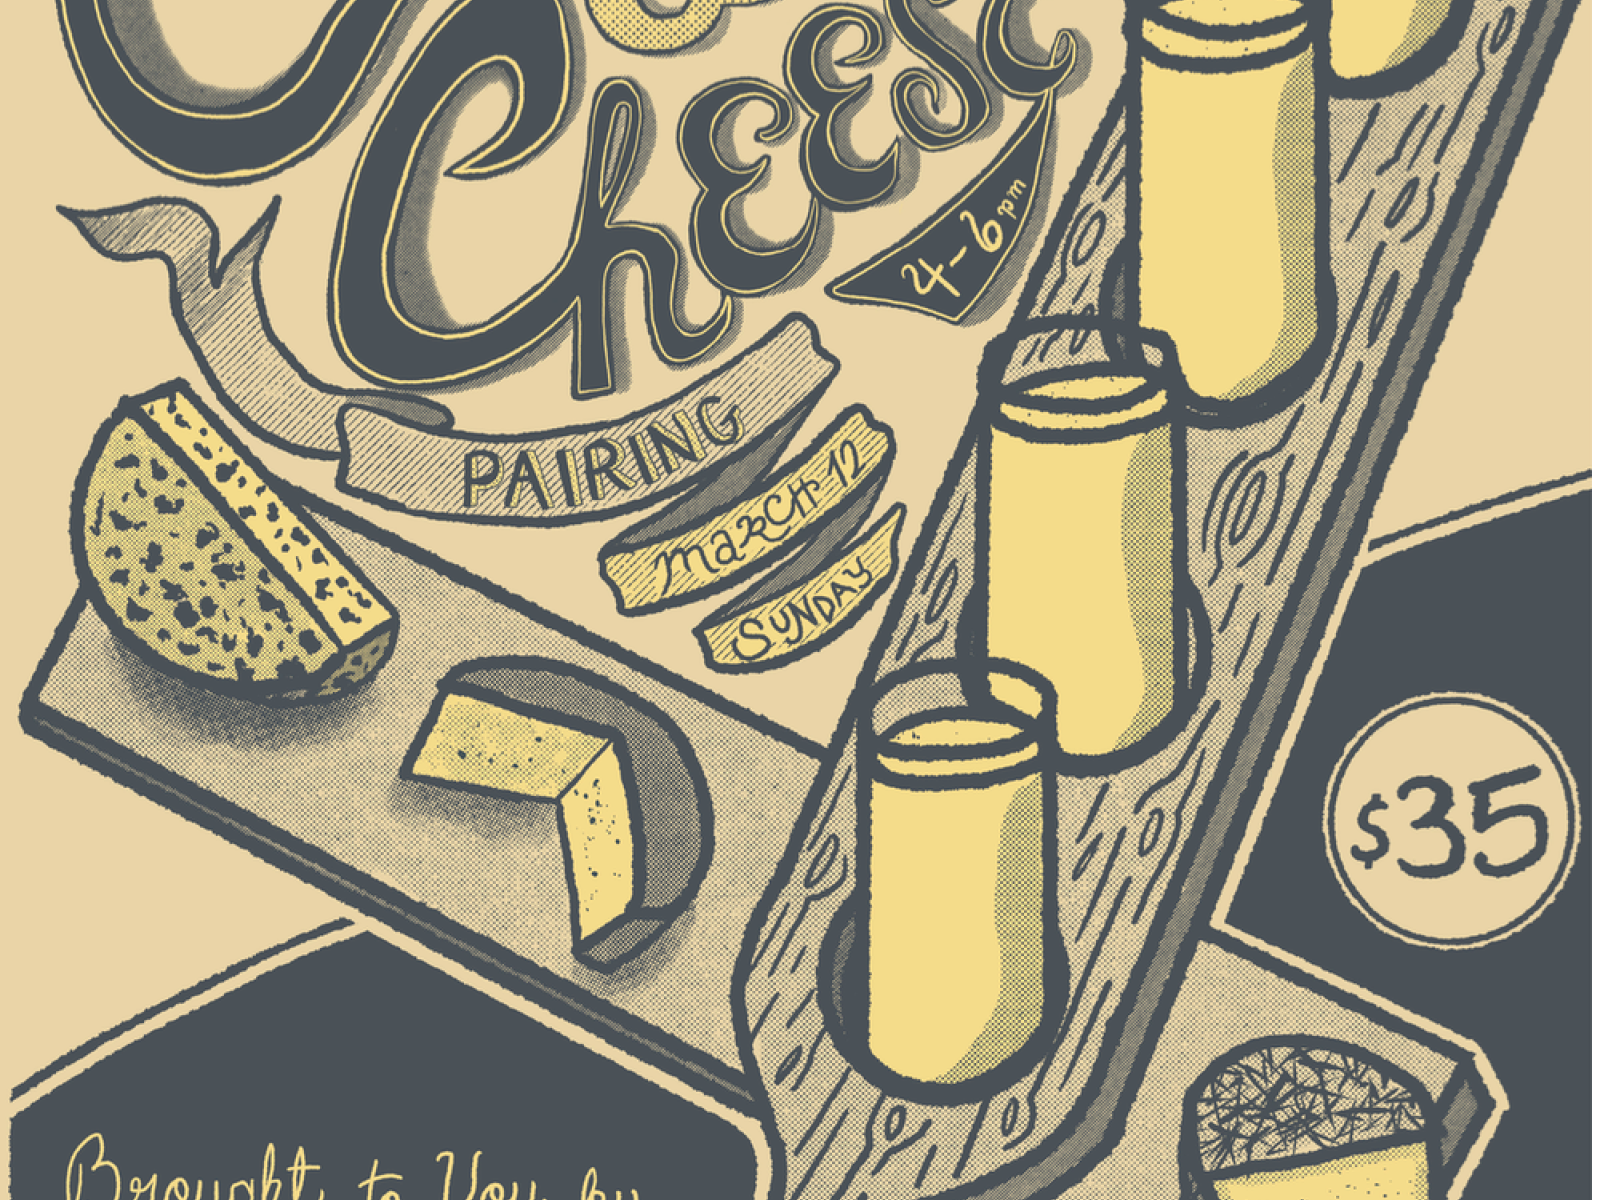 Main image for offer titled Cider & Cheese Pairing Event w Milkfarm: March 12